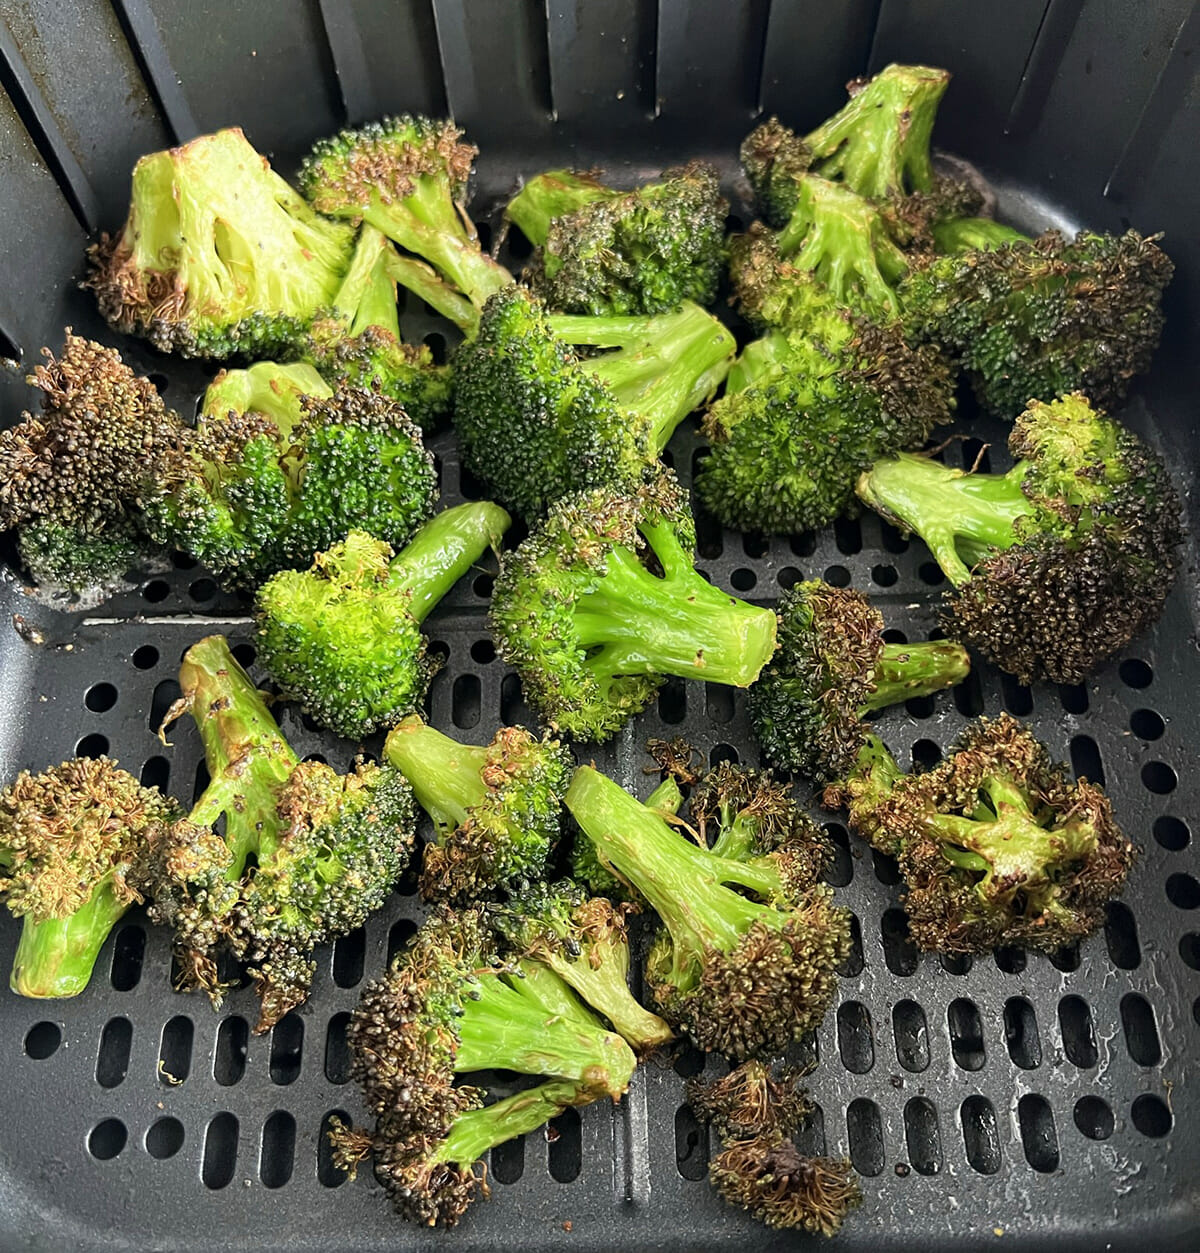 Recipe for roasted lemon pepper broccoli made in an air fryer.